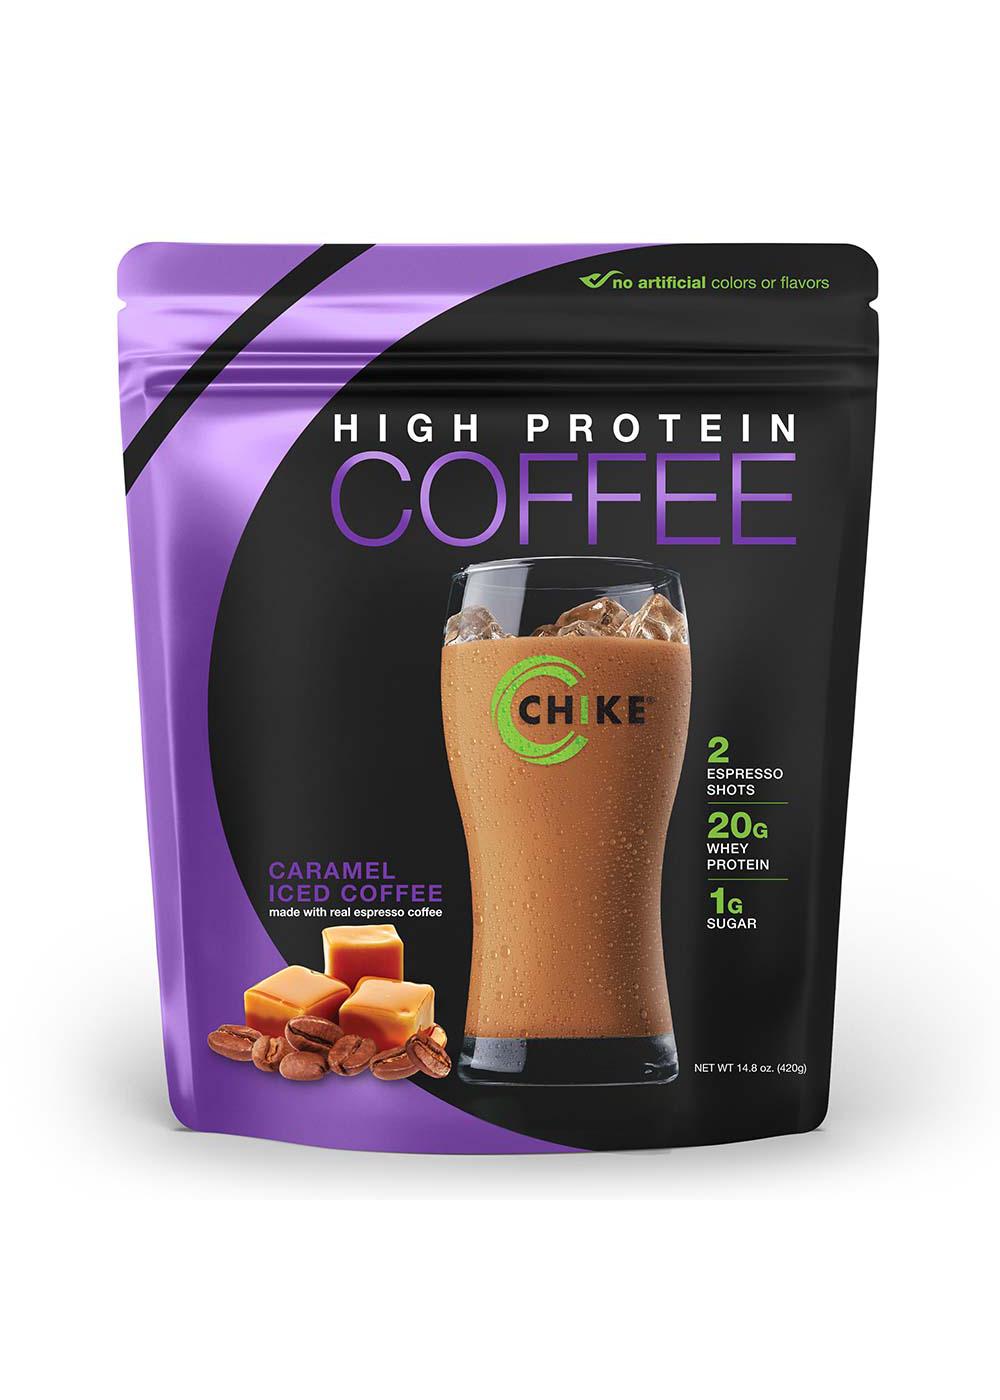 Chike 20g Protein Coffee - Caramel Iced Coffee; image 1 of 2